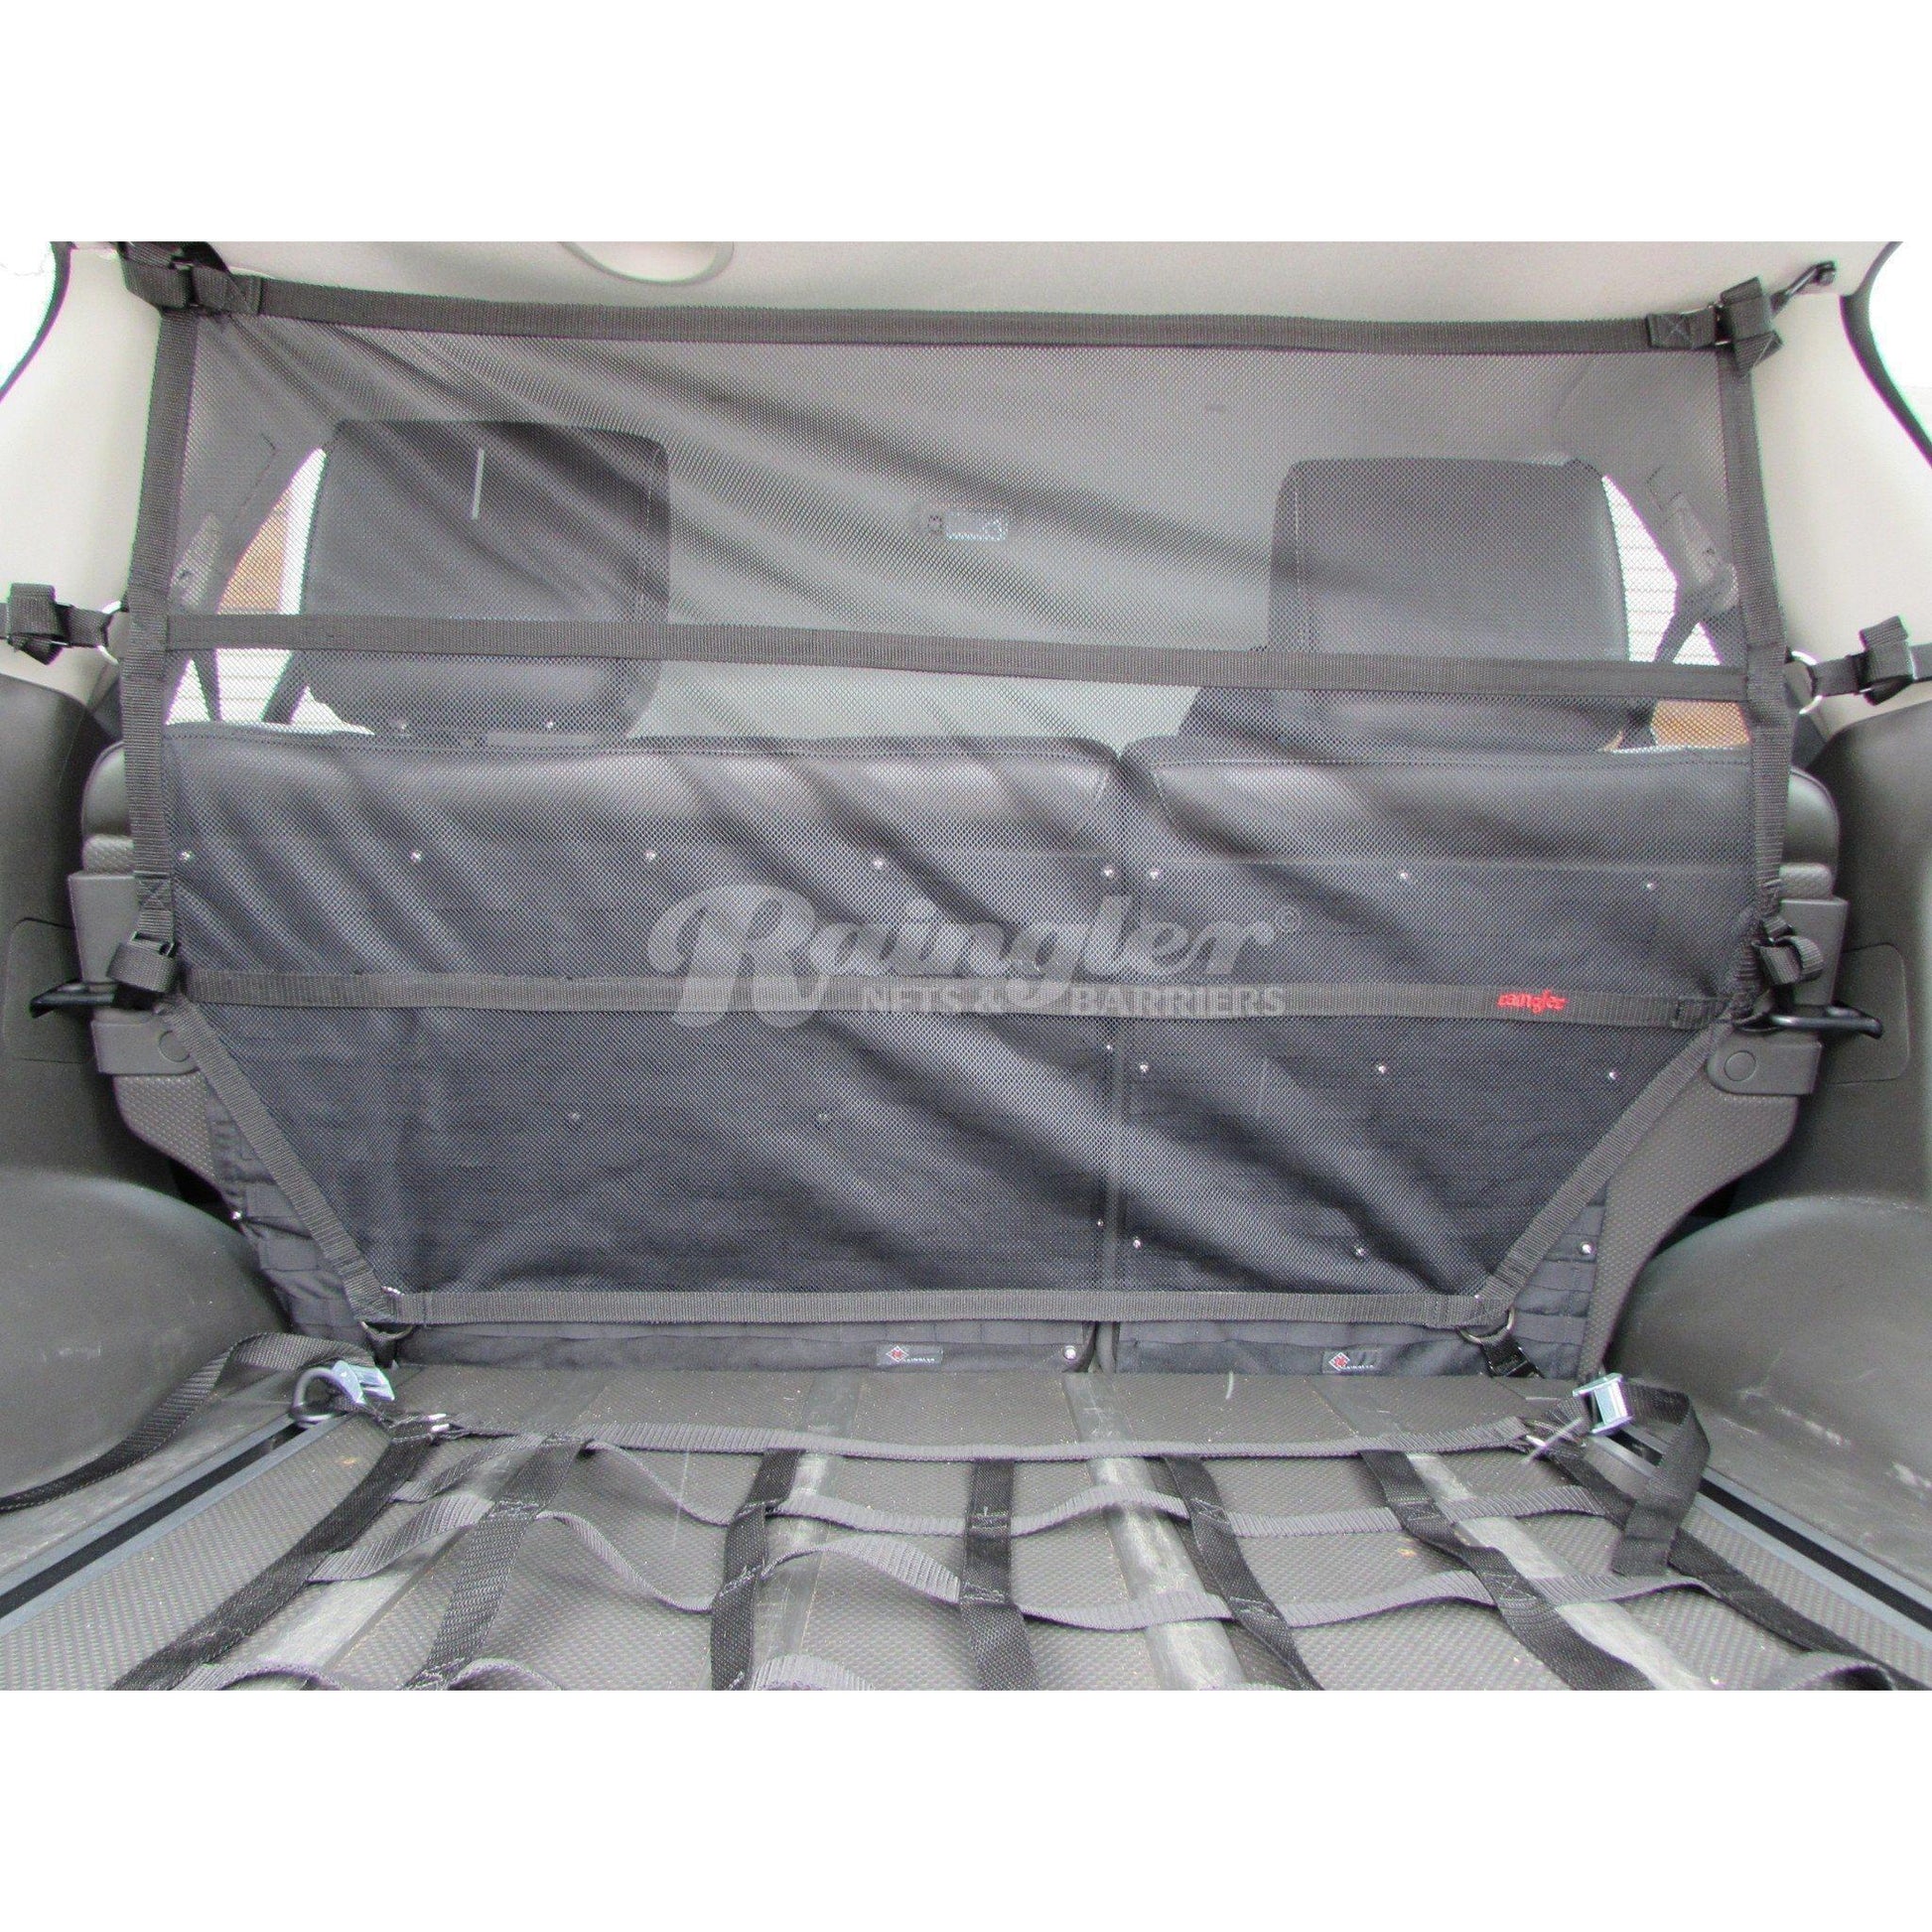 1997 - 2017 Ford Expedition and Expedition MAX Behind 2nd Row Seats Rear Barrier Divider Net-Raingler